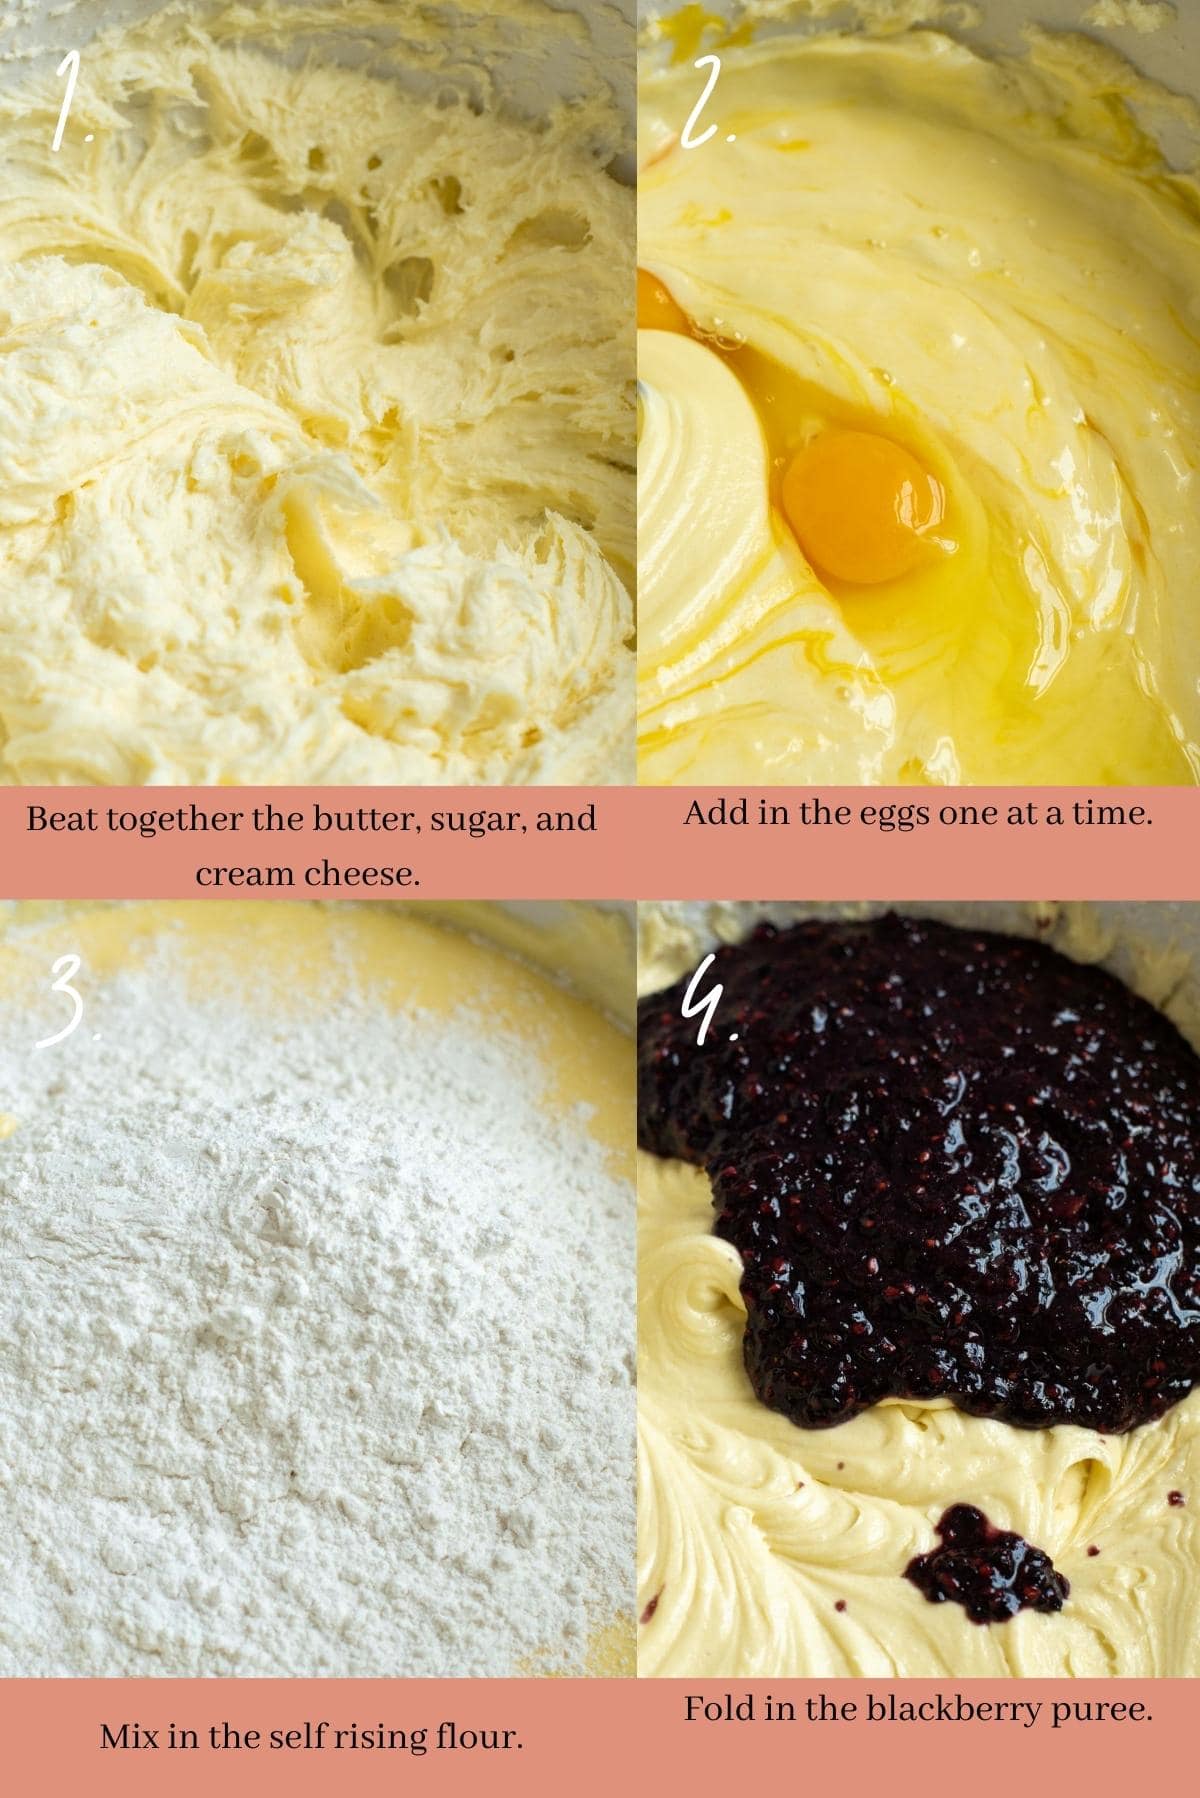 Collage showing how to make a blackberry pound cake.